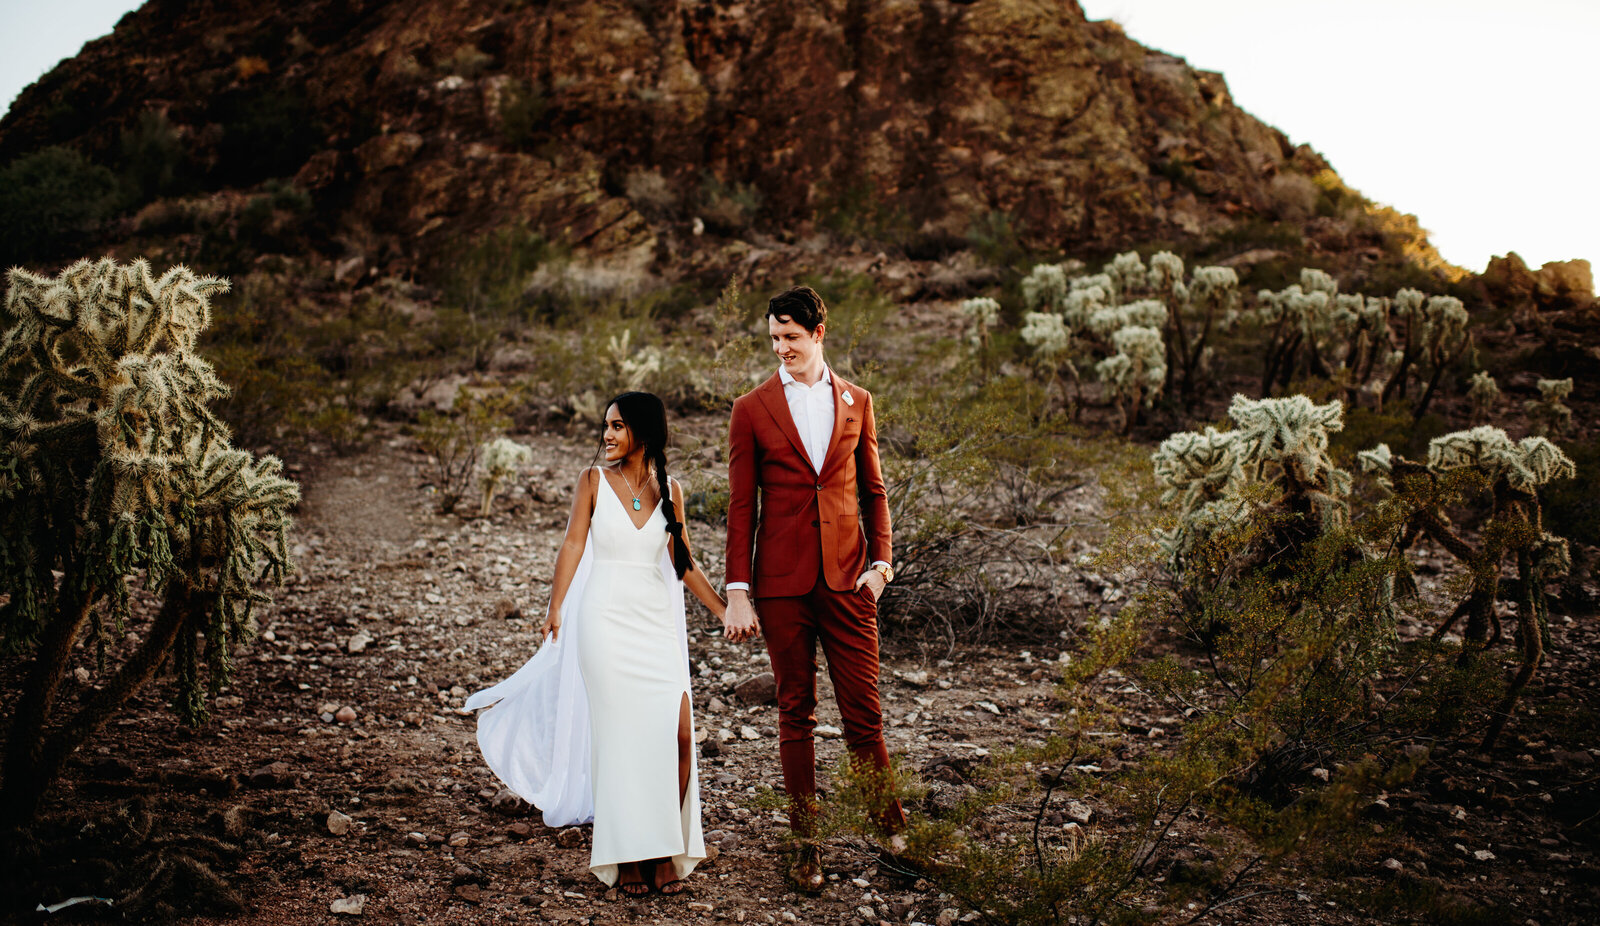 Husband wearing an orange suit holding his wife's hand and smiling at her in the AZ desert. Wife is wearing a fitted white wedding dress with a flowing cape.